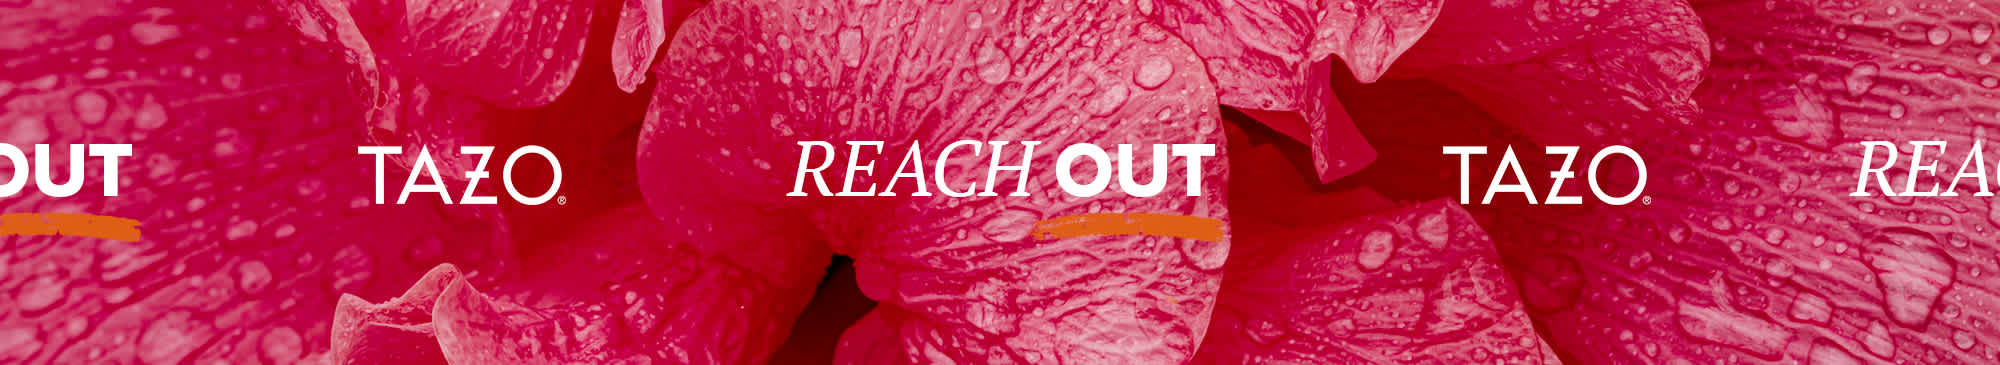 Reach Out image